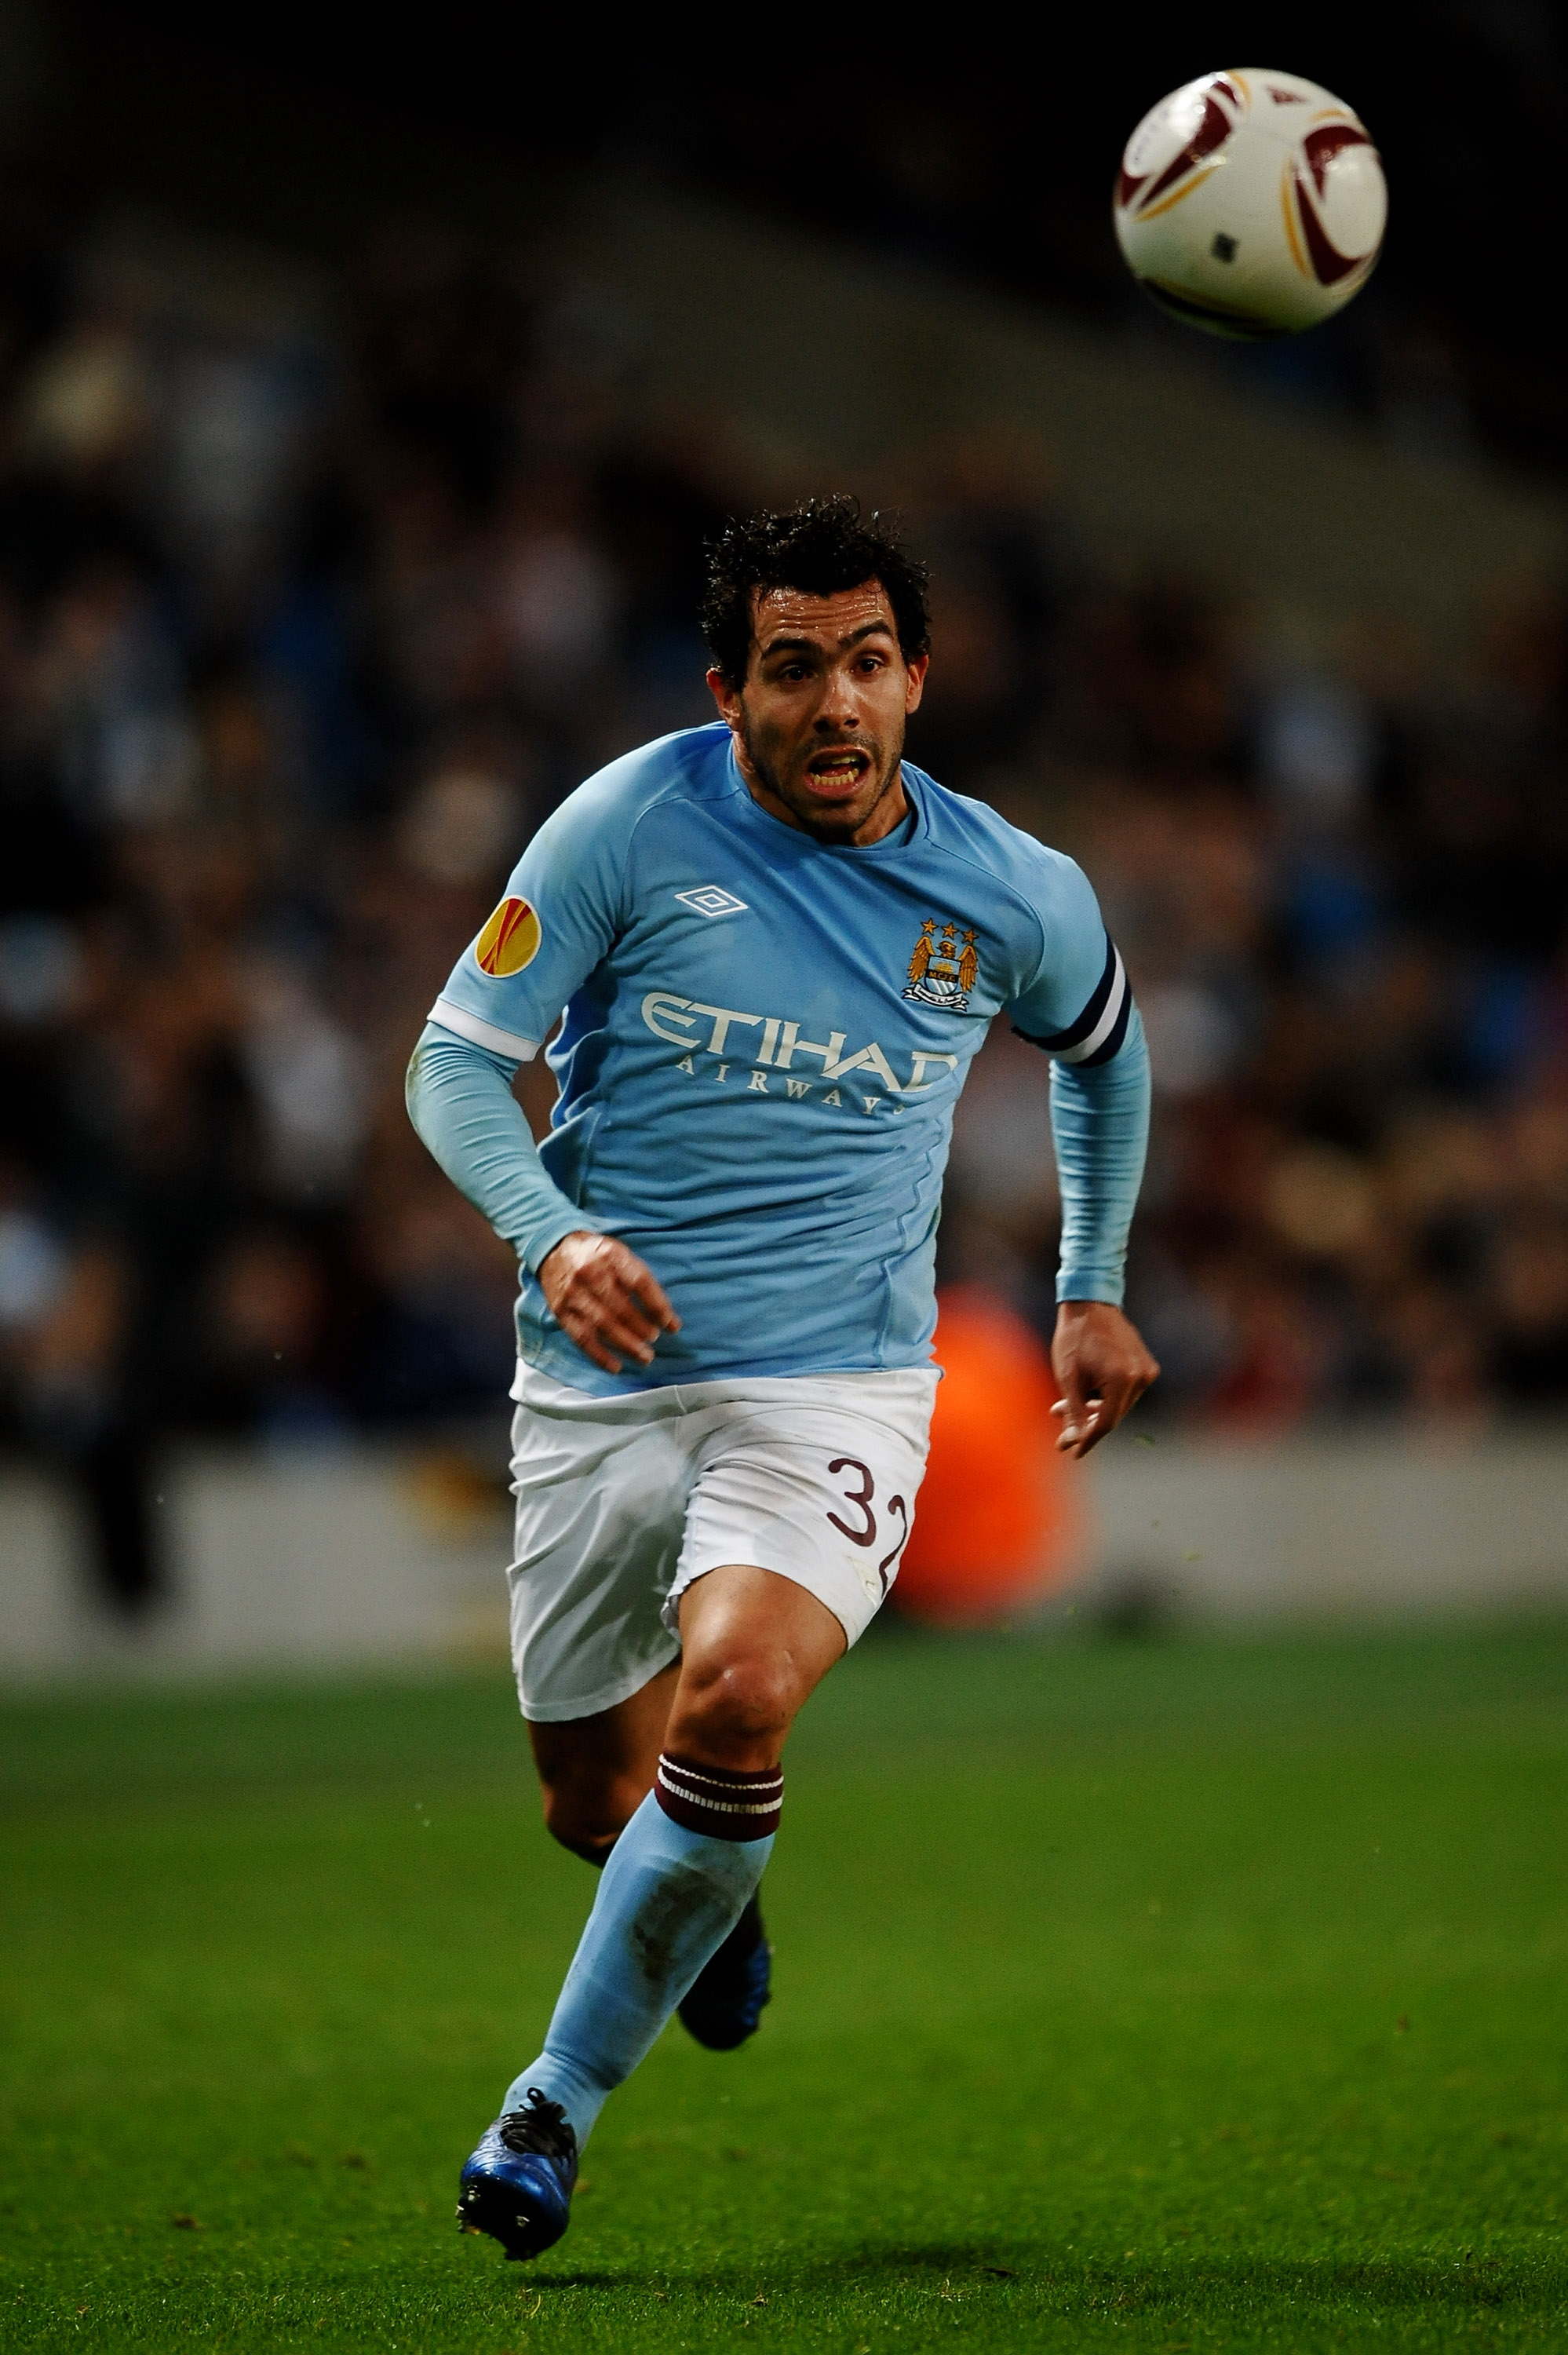 MANCHESTER, ENGLAND - MARCH 17:  Carlos Tevez of Manchester City runs with the ball during the UEFA Europa League round of 16 second leg match between Manchester City and Dynamo Kiev at City of Manchester Stadium on March 17, 2011 in Manchester, England.